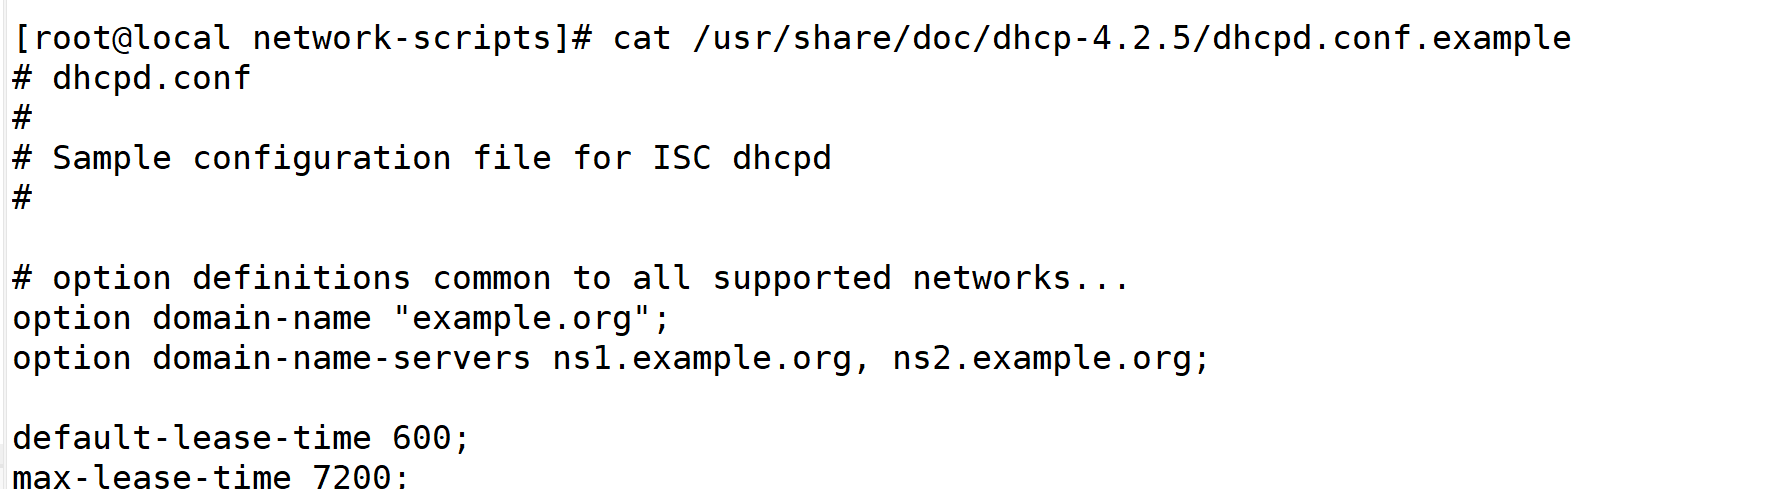 linux DHCP